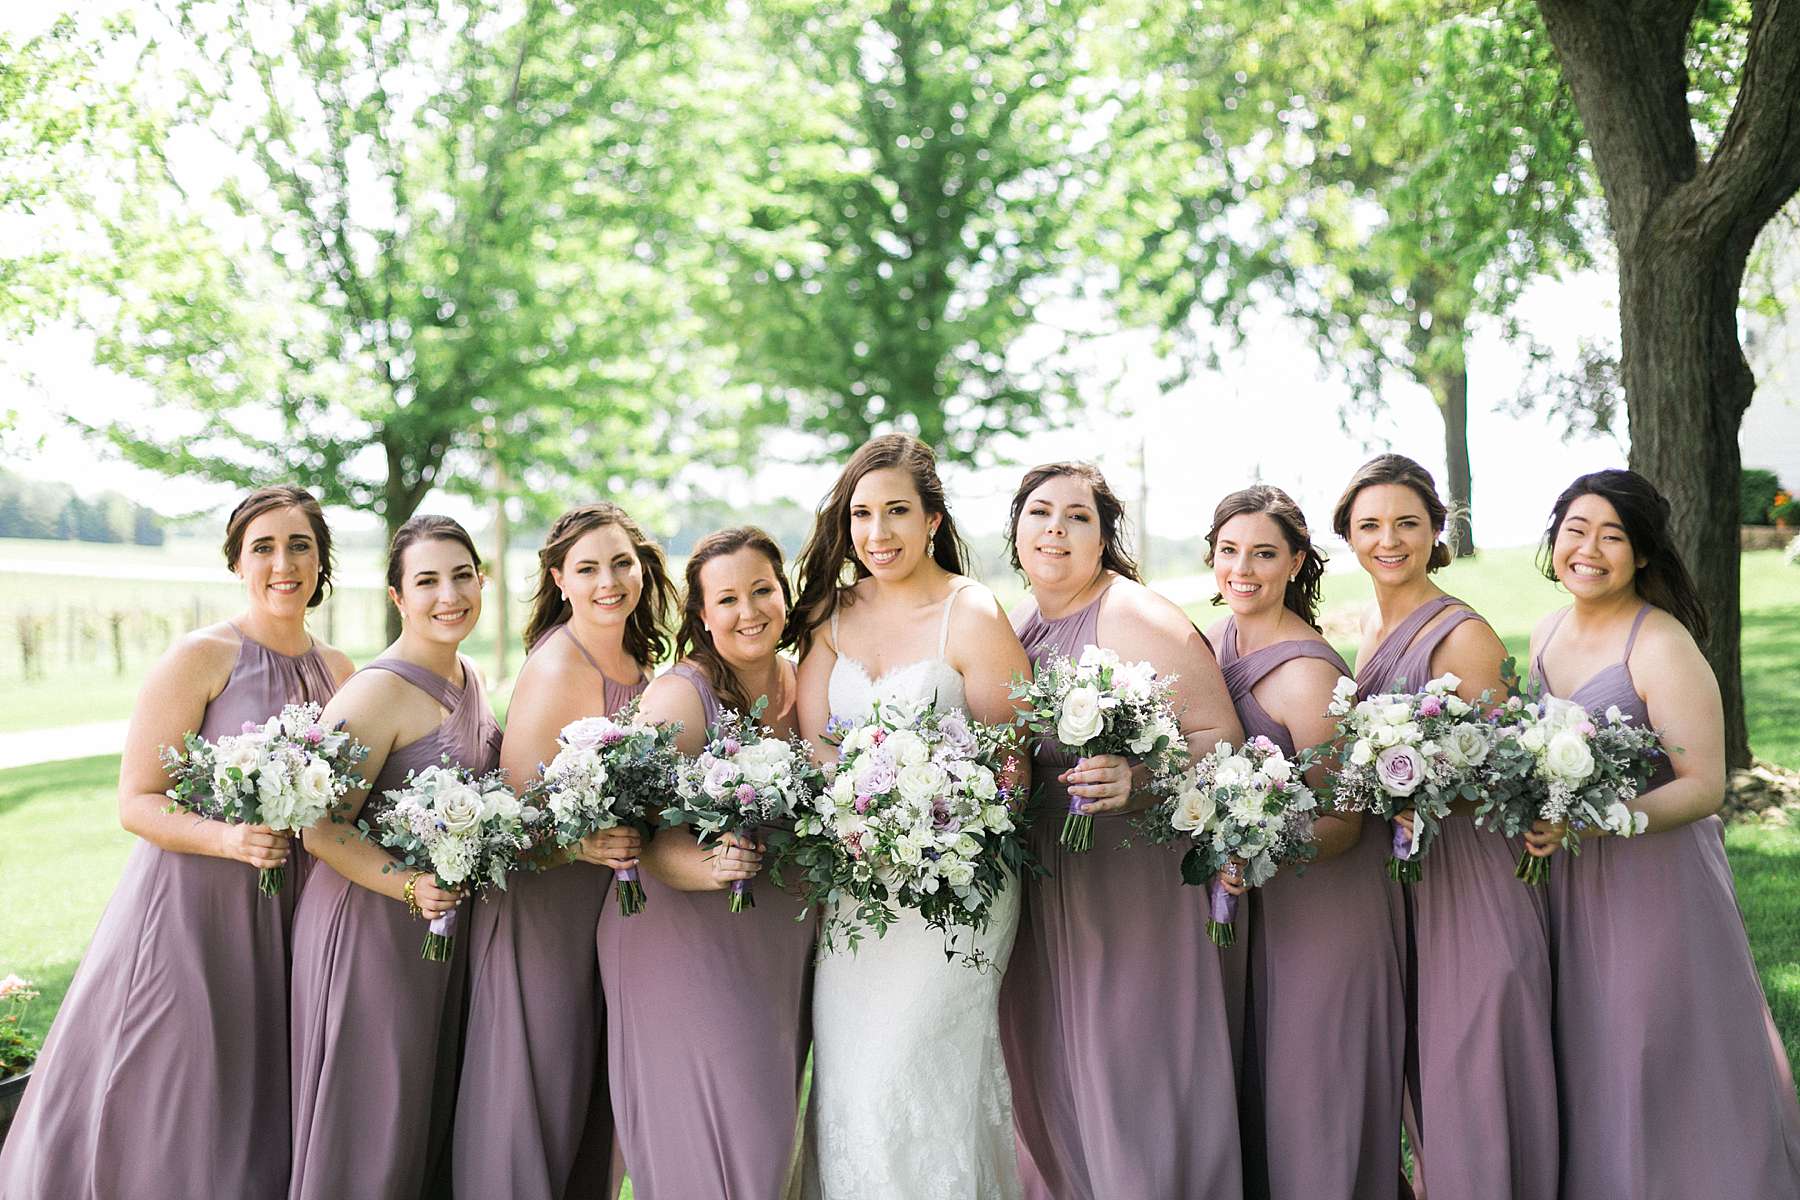 bridal party photos, rustic romantic wedding at over the vines with midwestern bride, photo by laurelyn savannah photography